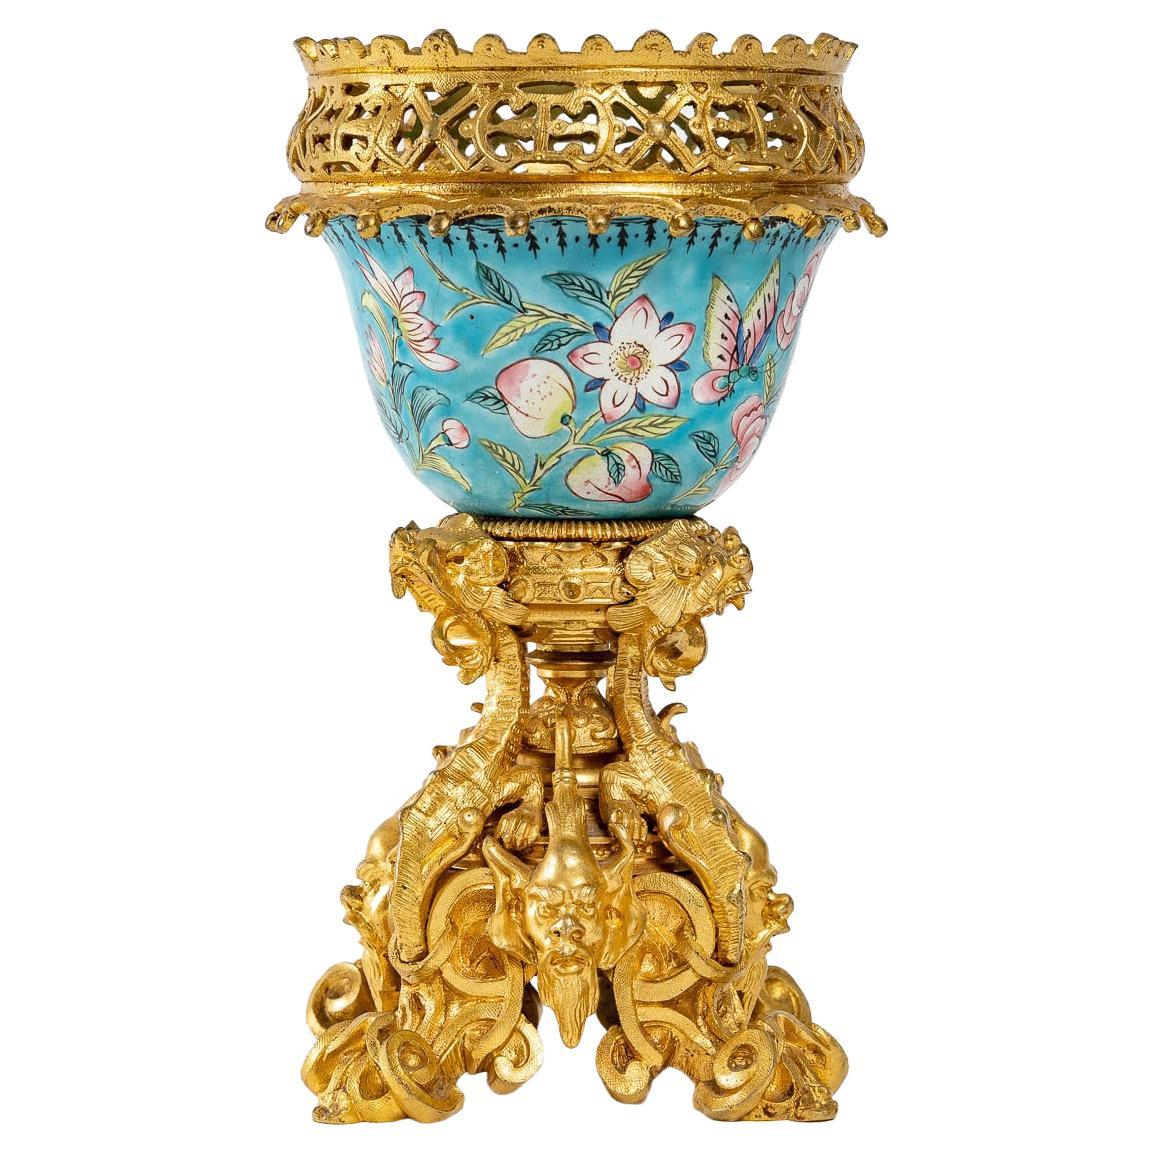 Asian Art Porcelain and Chased and Gilt Bronze Bowl, 19th Century.